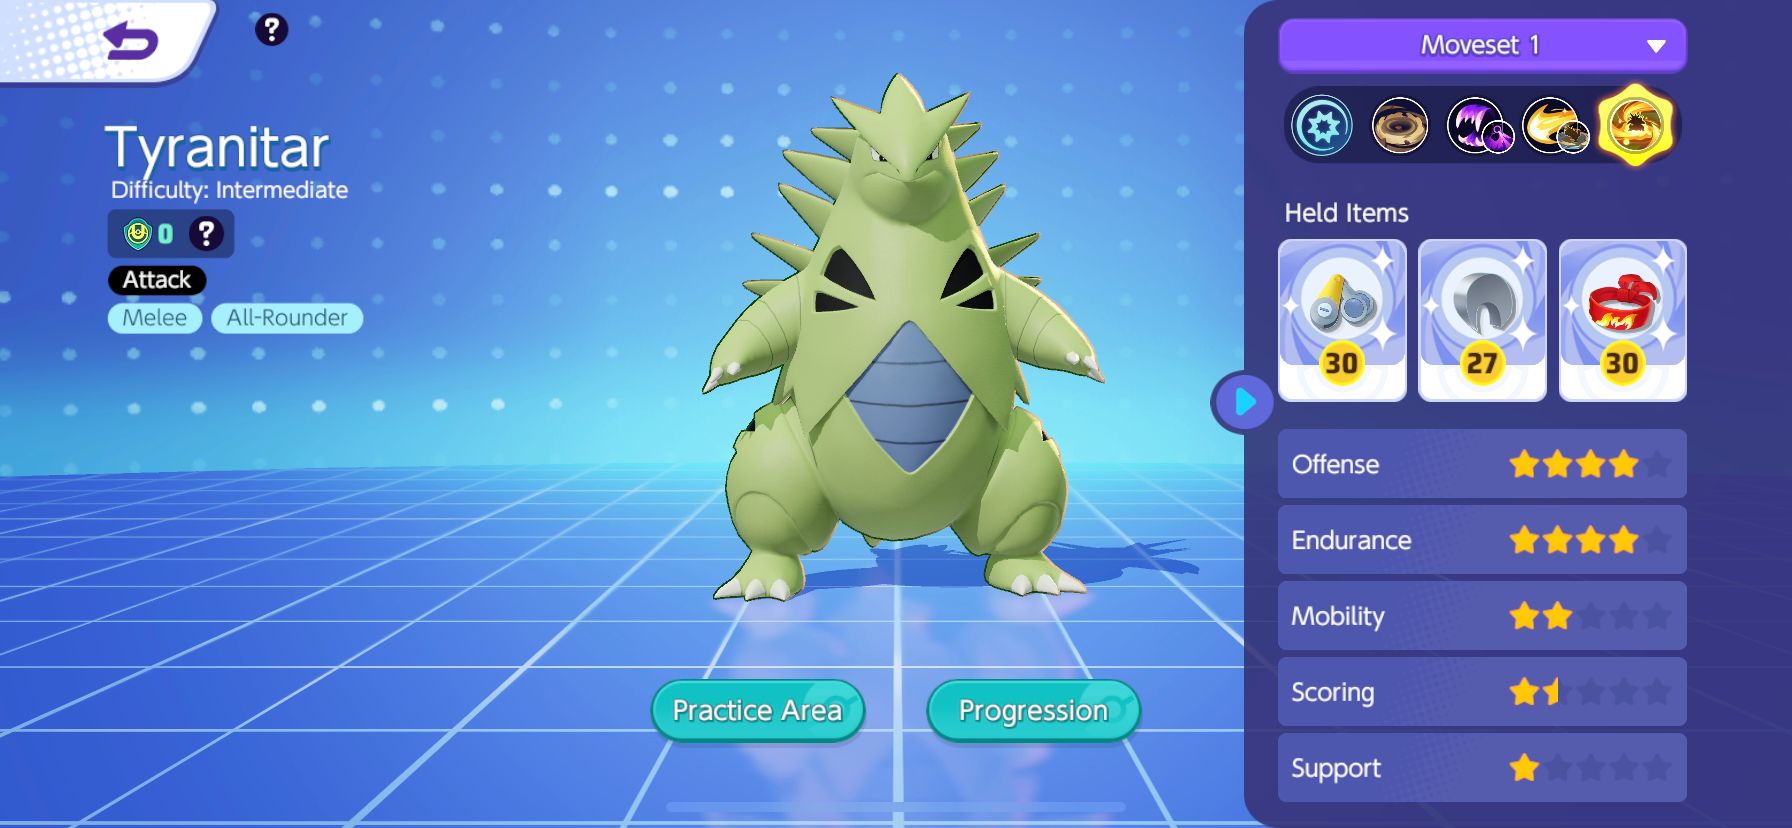 Tyranitar in the Pokemon selection screen with its different stats and Held Items shown